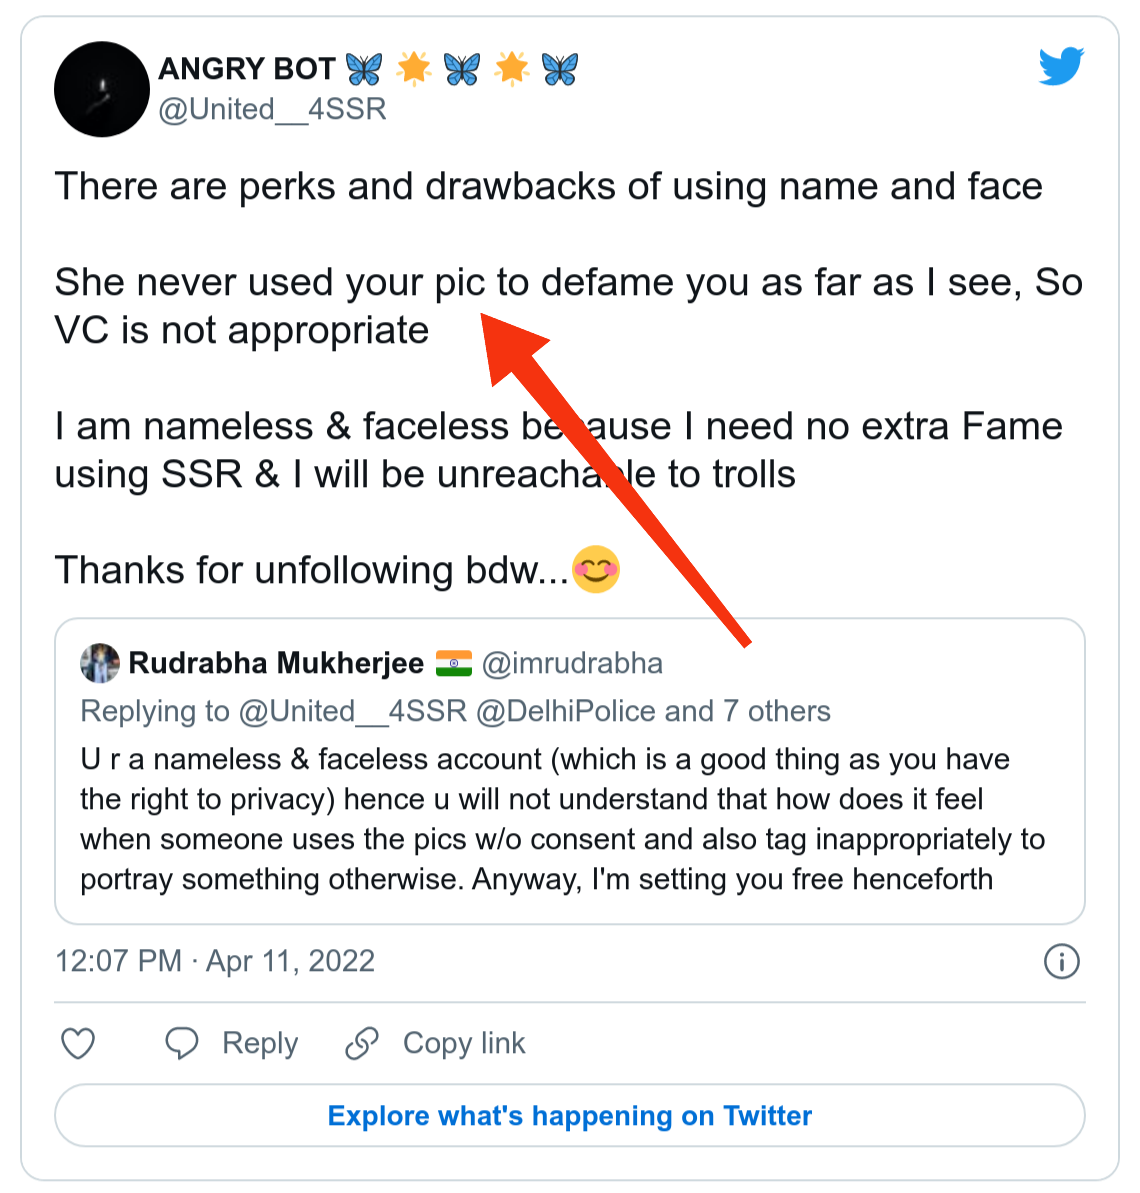 This Twitter setting will help block all tweets on SSR, Rhea and other  topics that you may not want to see - Times of India